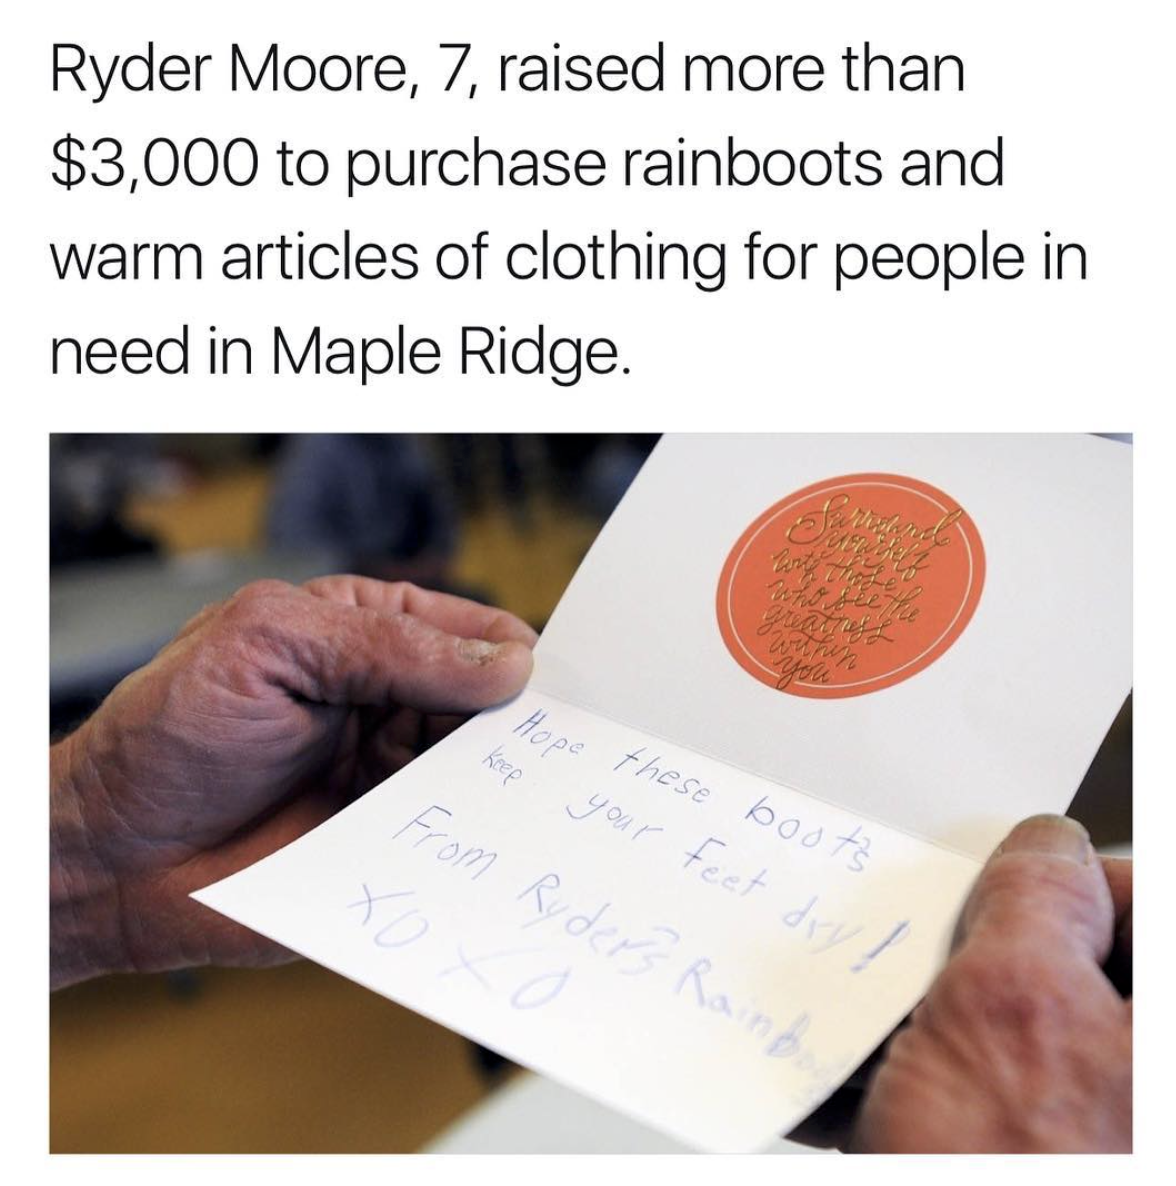 writing - Ryder Moore, 7, raised more than $3,000 to purchase rainboots and warm articles of clothing for people in need in Maple Ridge. Kare these bouts your feet dat From Ruders Rainer